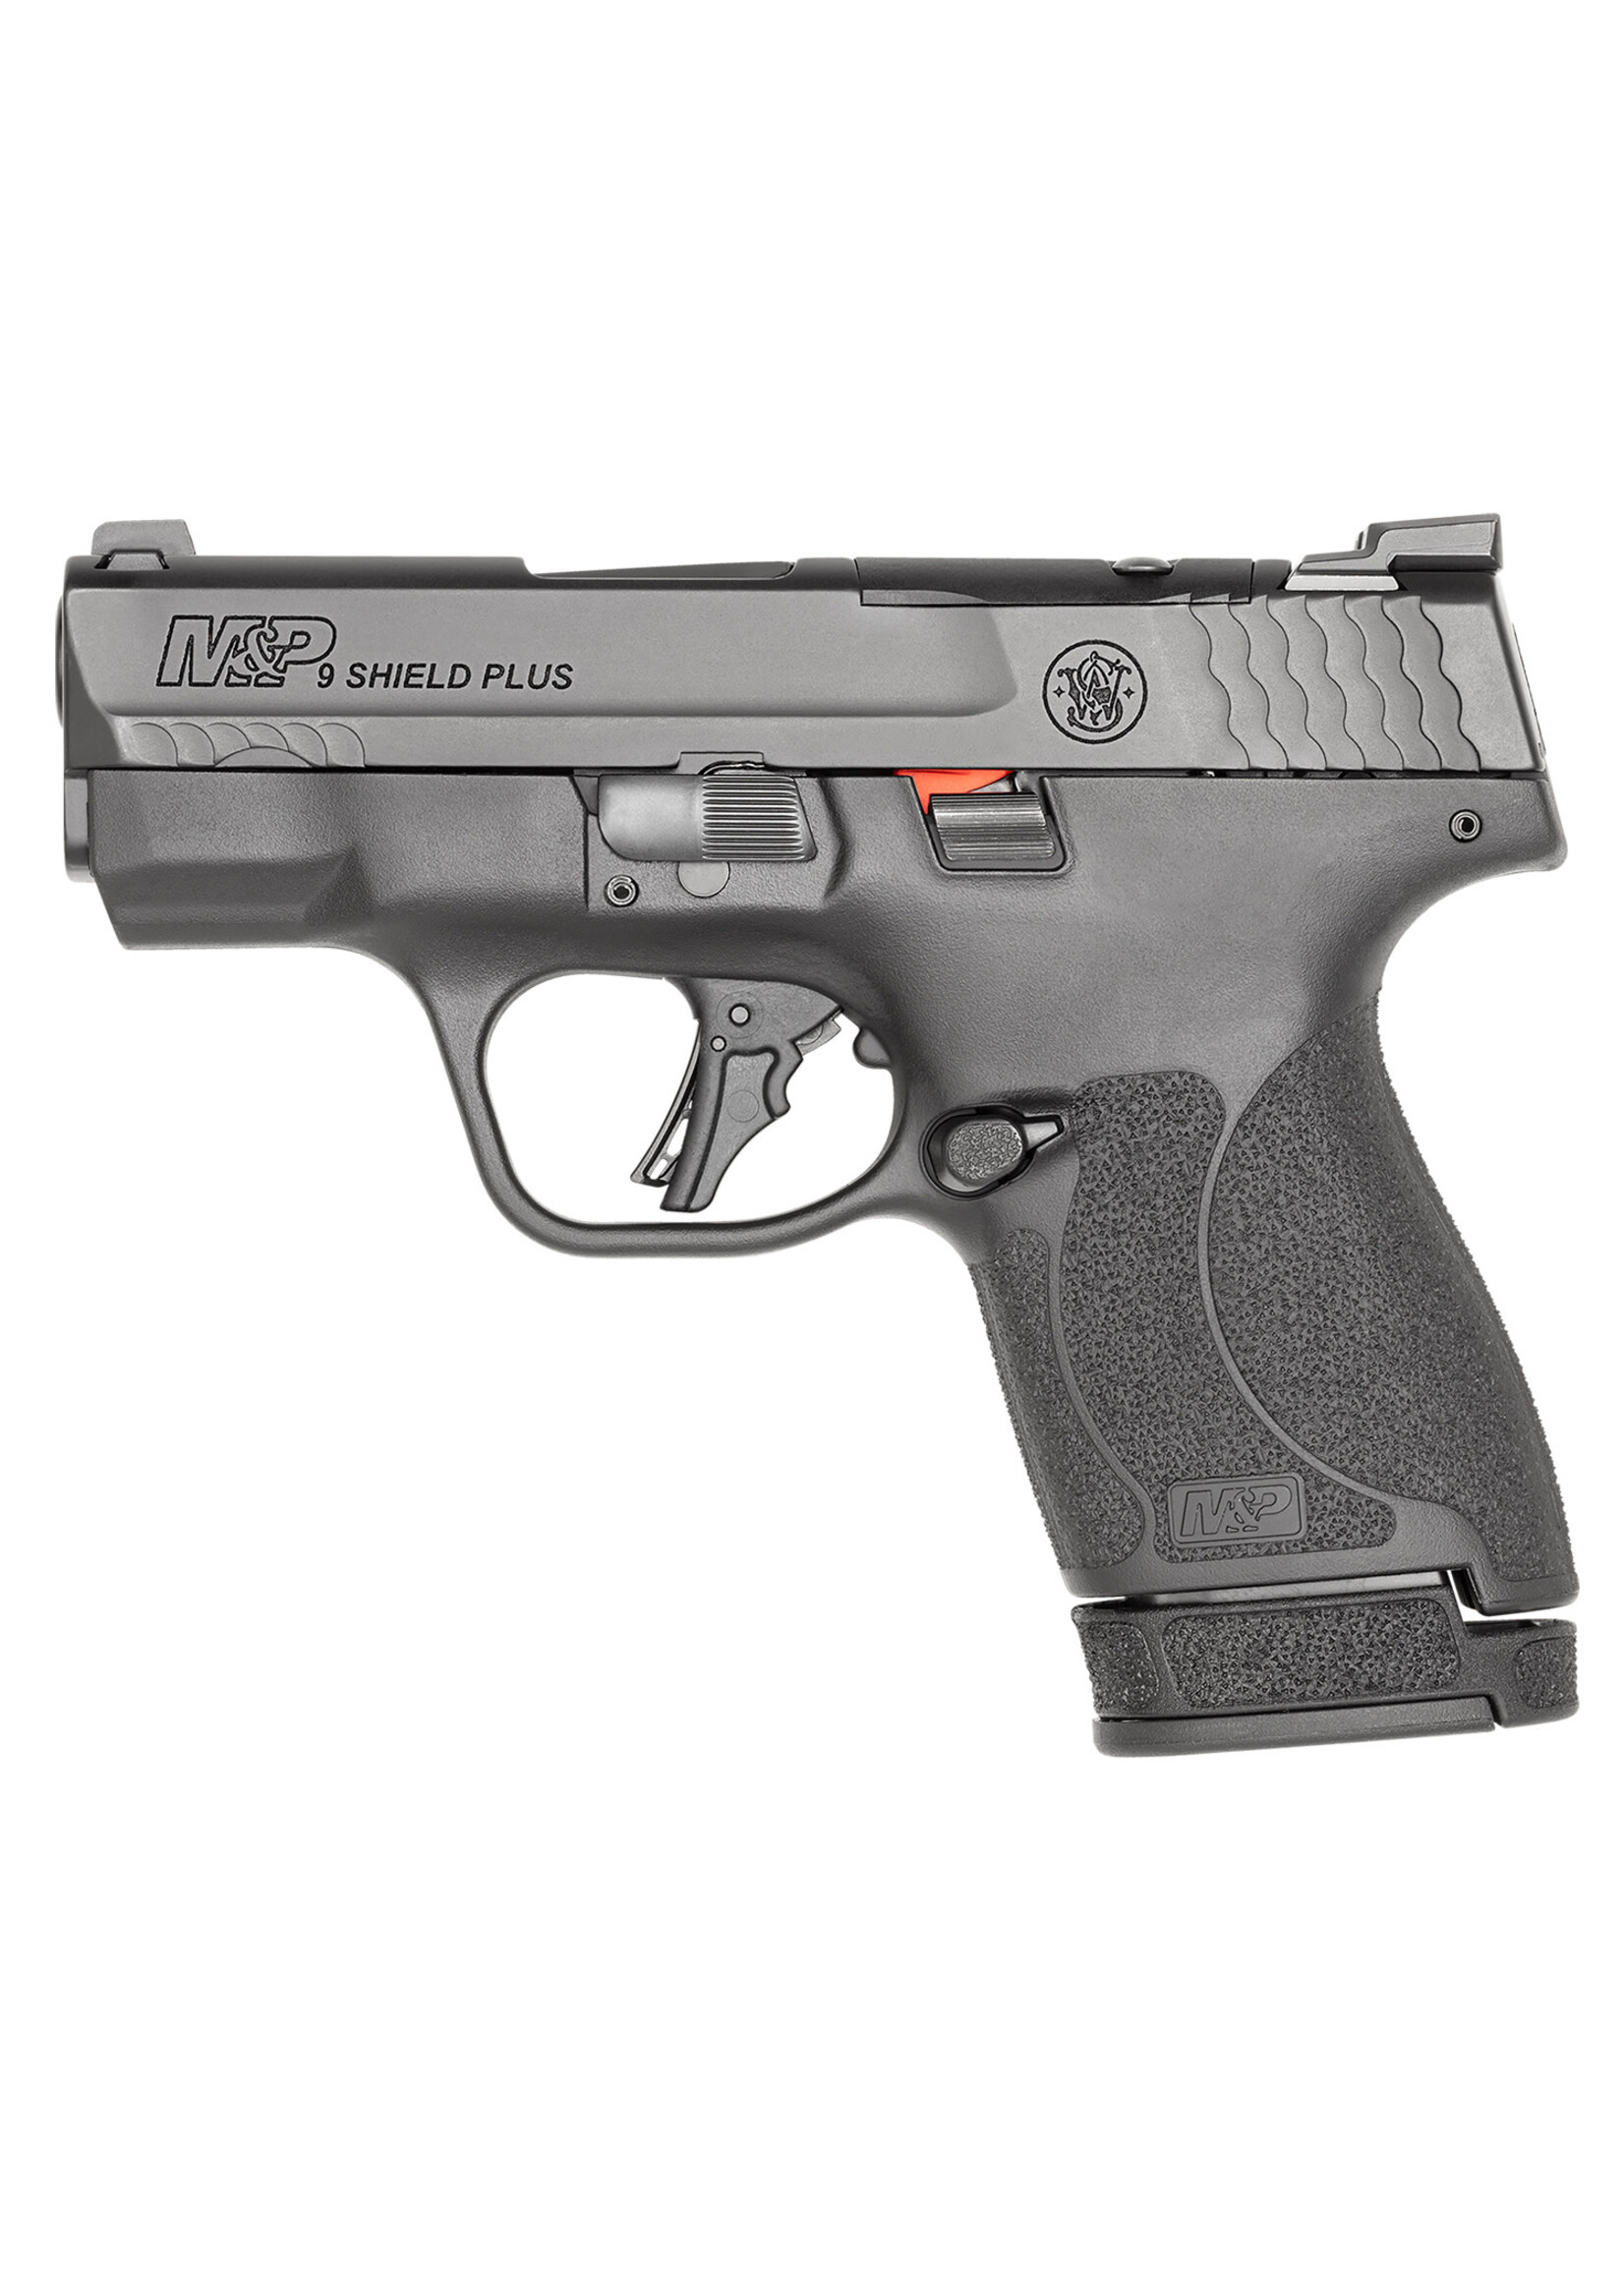 Smith and Wesson (S&W) Smith & Wesson 13534 M&P Shield Plus Optic Ready 9mm Luger 3.10" Barrel 10+1 Or 13+1, Black Polymer Frame, Optic Cut Armornite Stainless Steel Slide, Orange Ring Tritium Front/Black Tritium Rear Night Sights, No Manual Safety